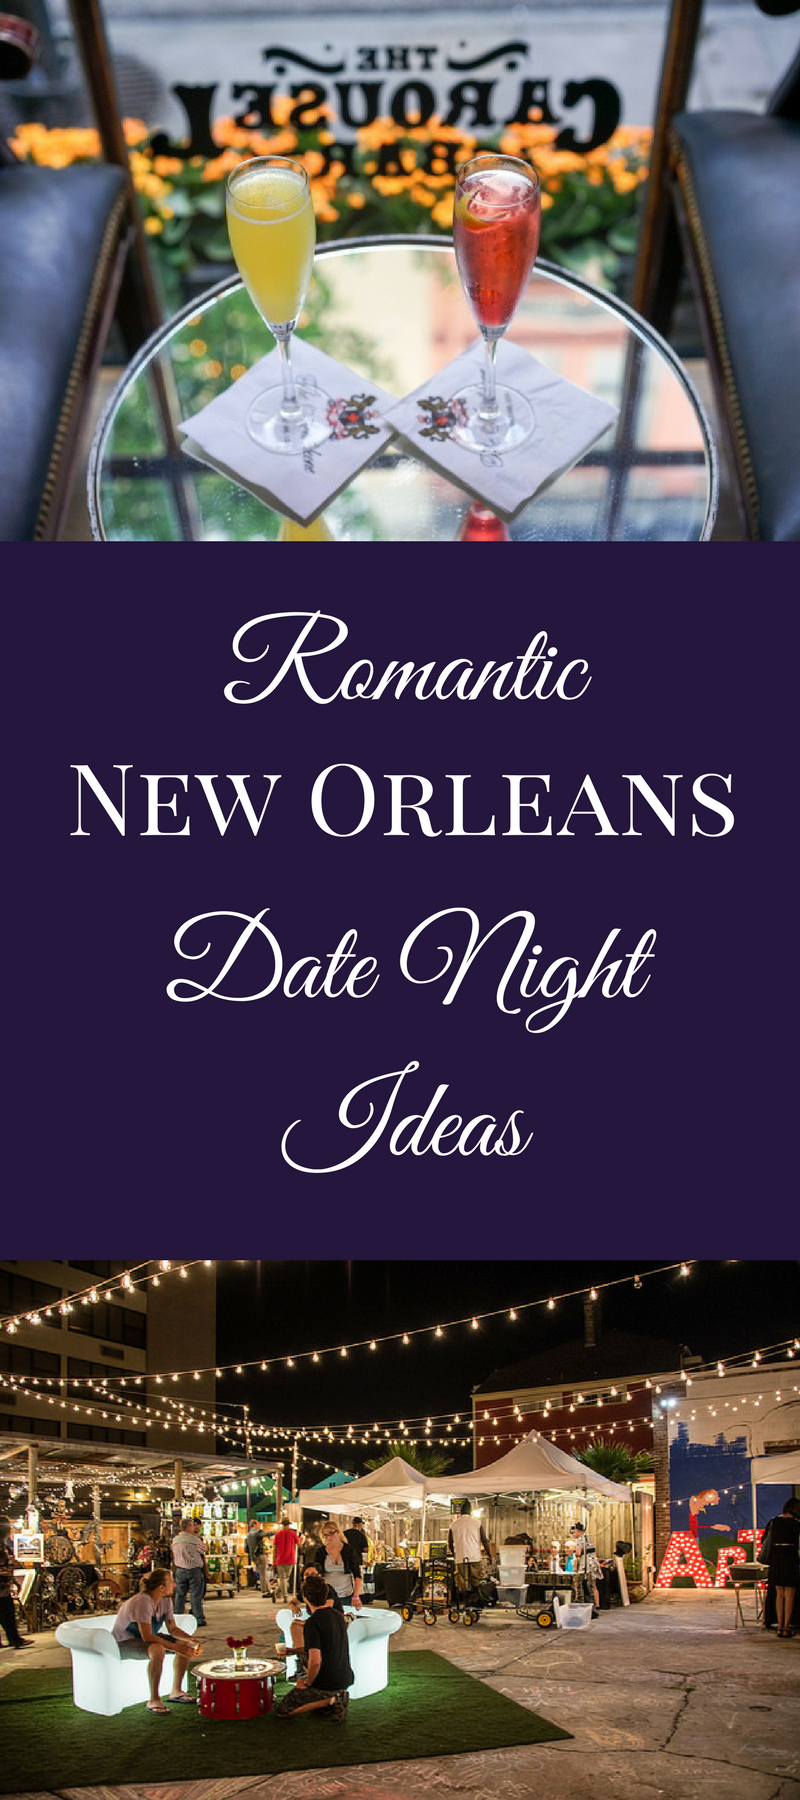 Exploring the French Quarter with your sweetheart? Try these 7 romantic date night ideas to help you craft your own intimate New Orleans evening!